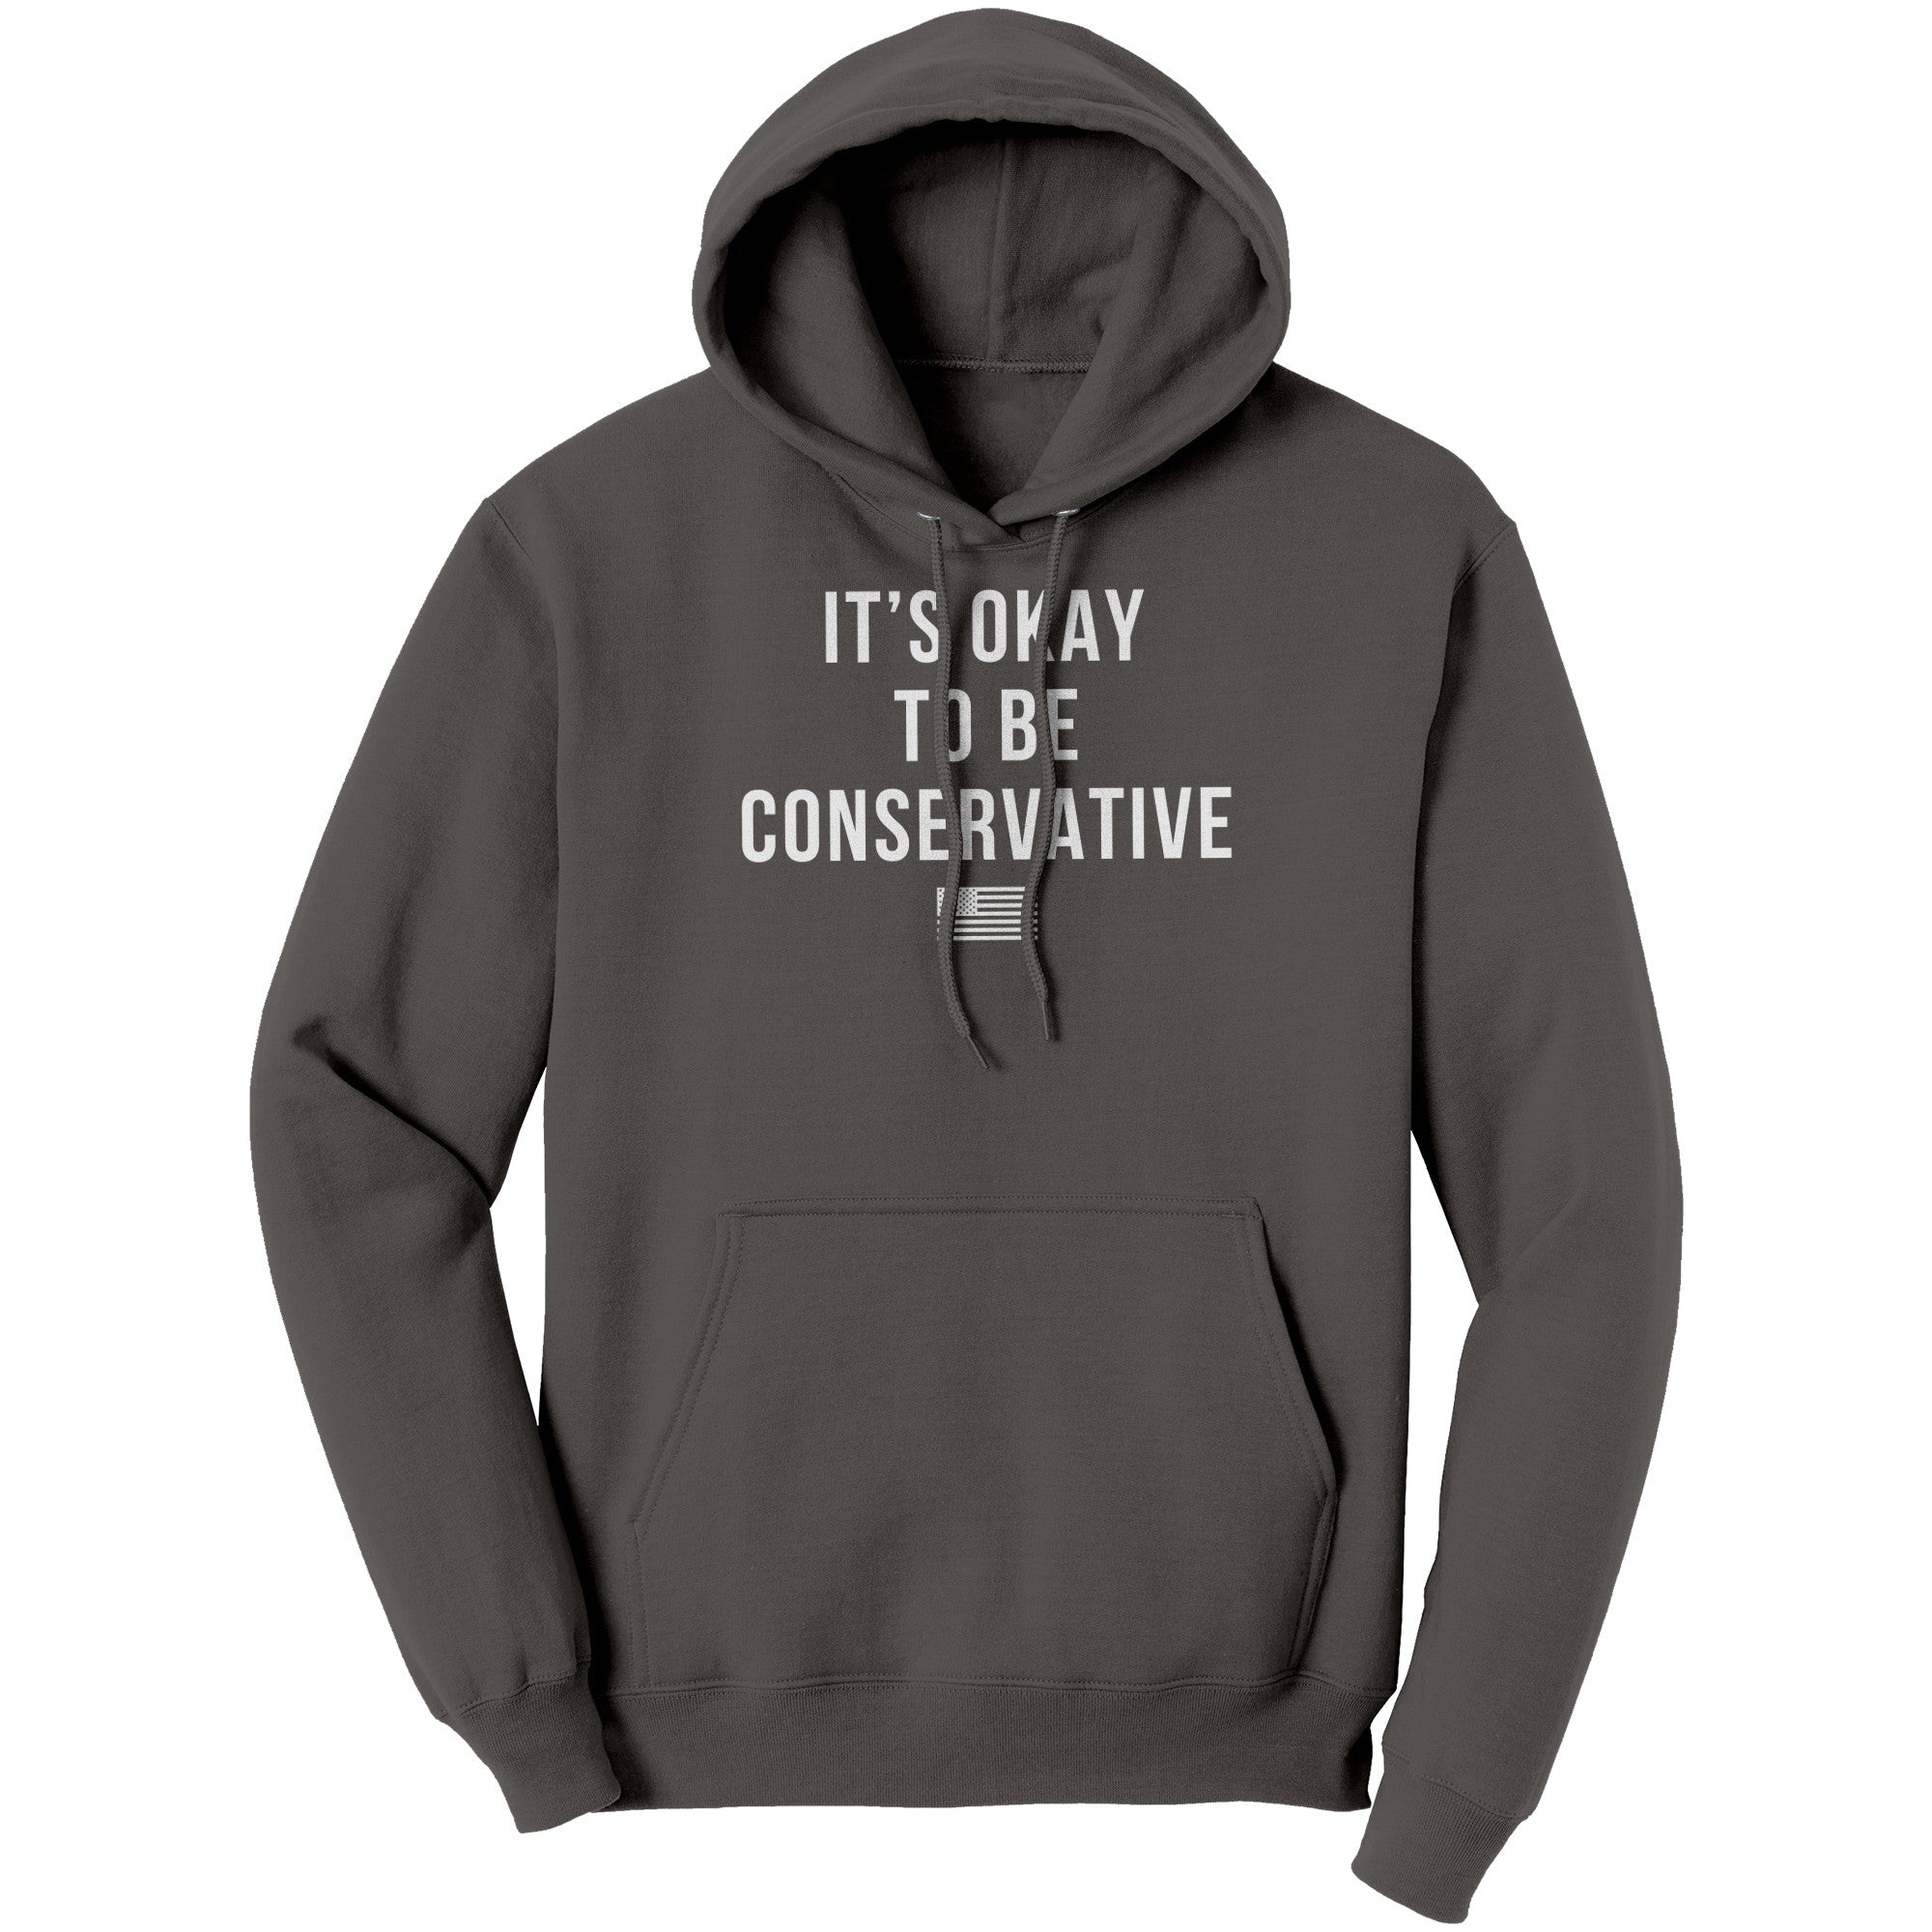 It's Okay To Be Conservative -Apparel | Drunk America 